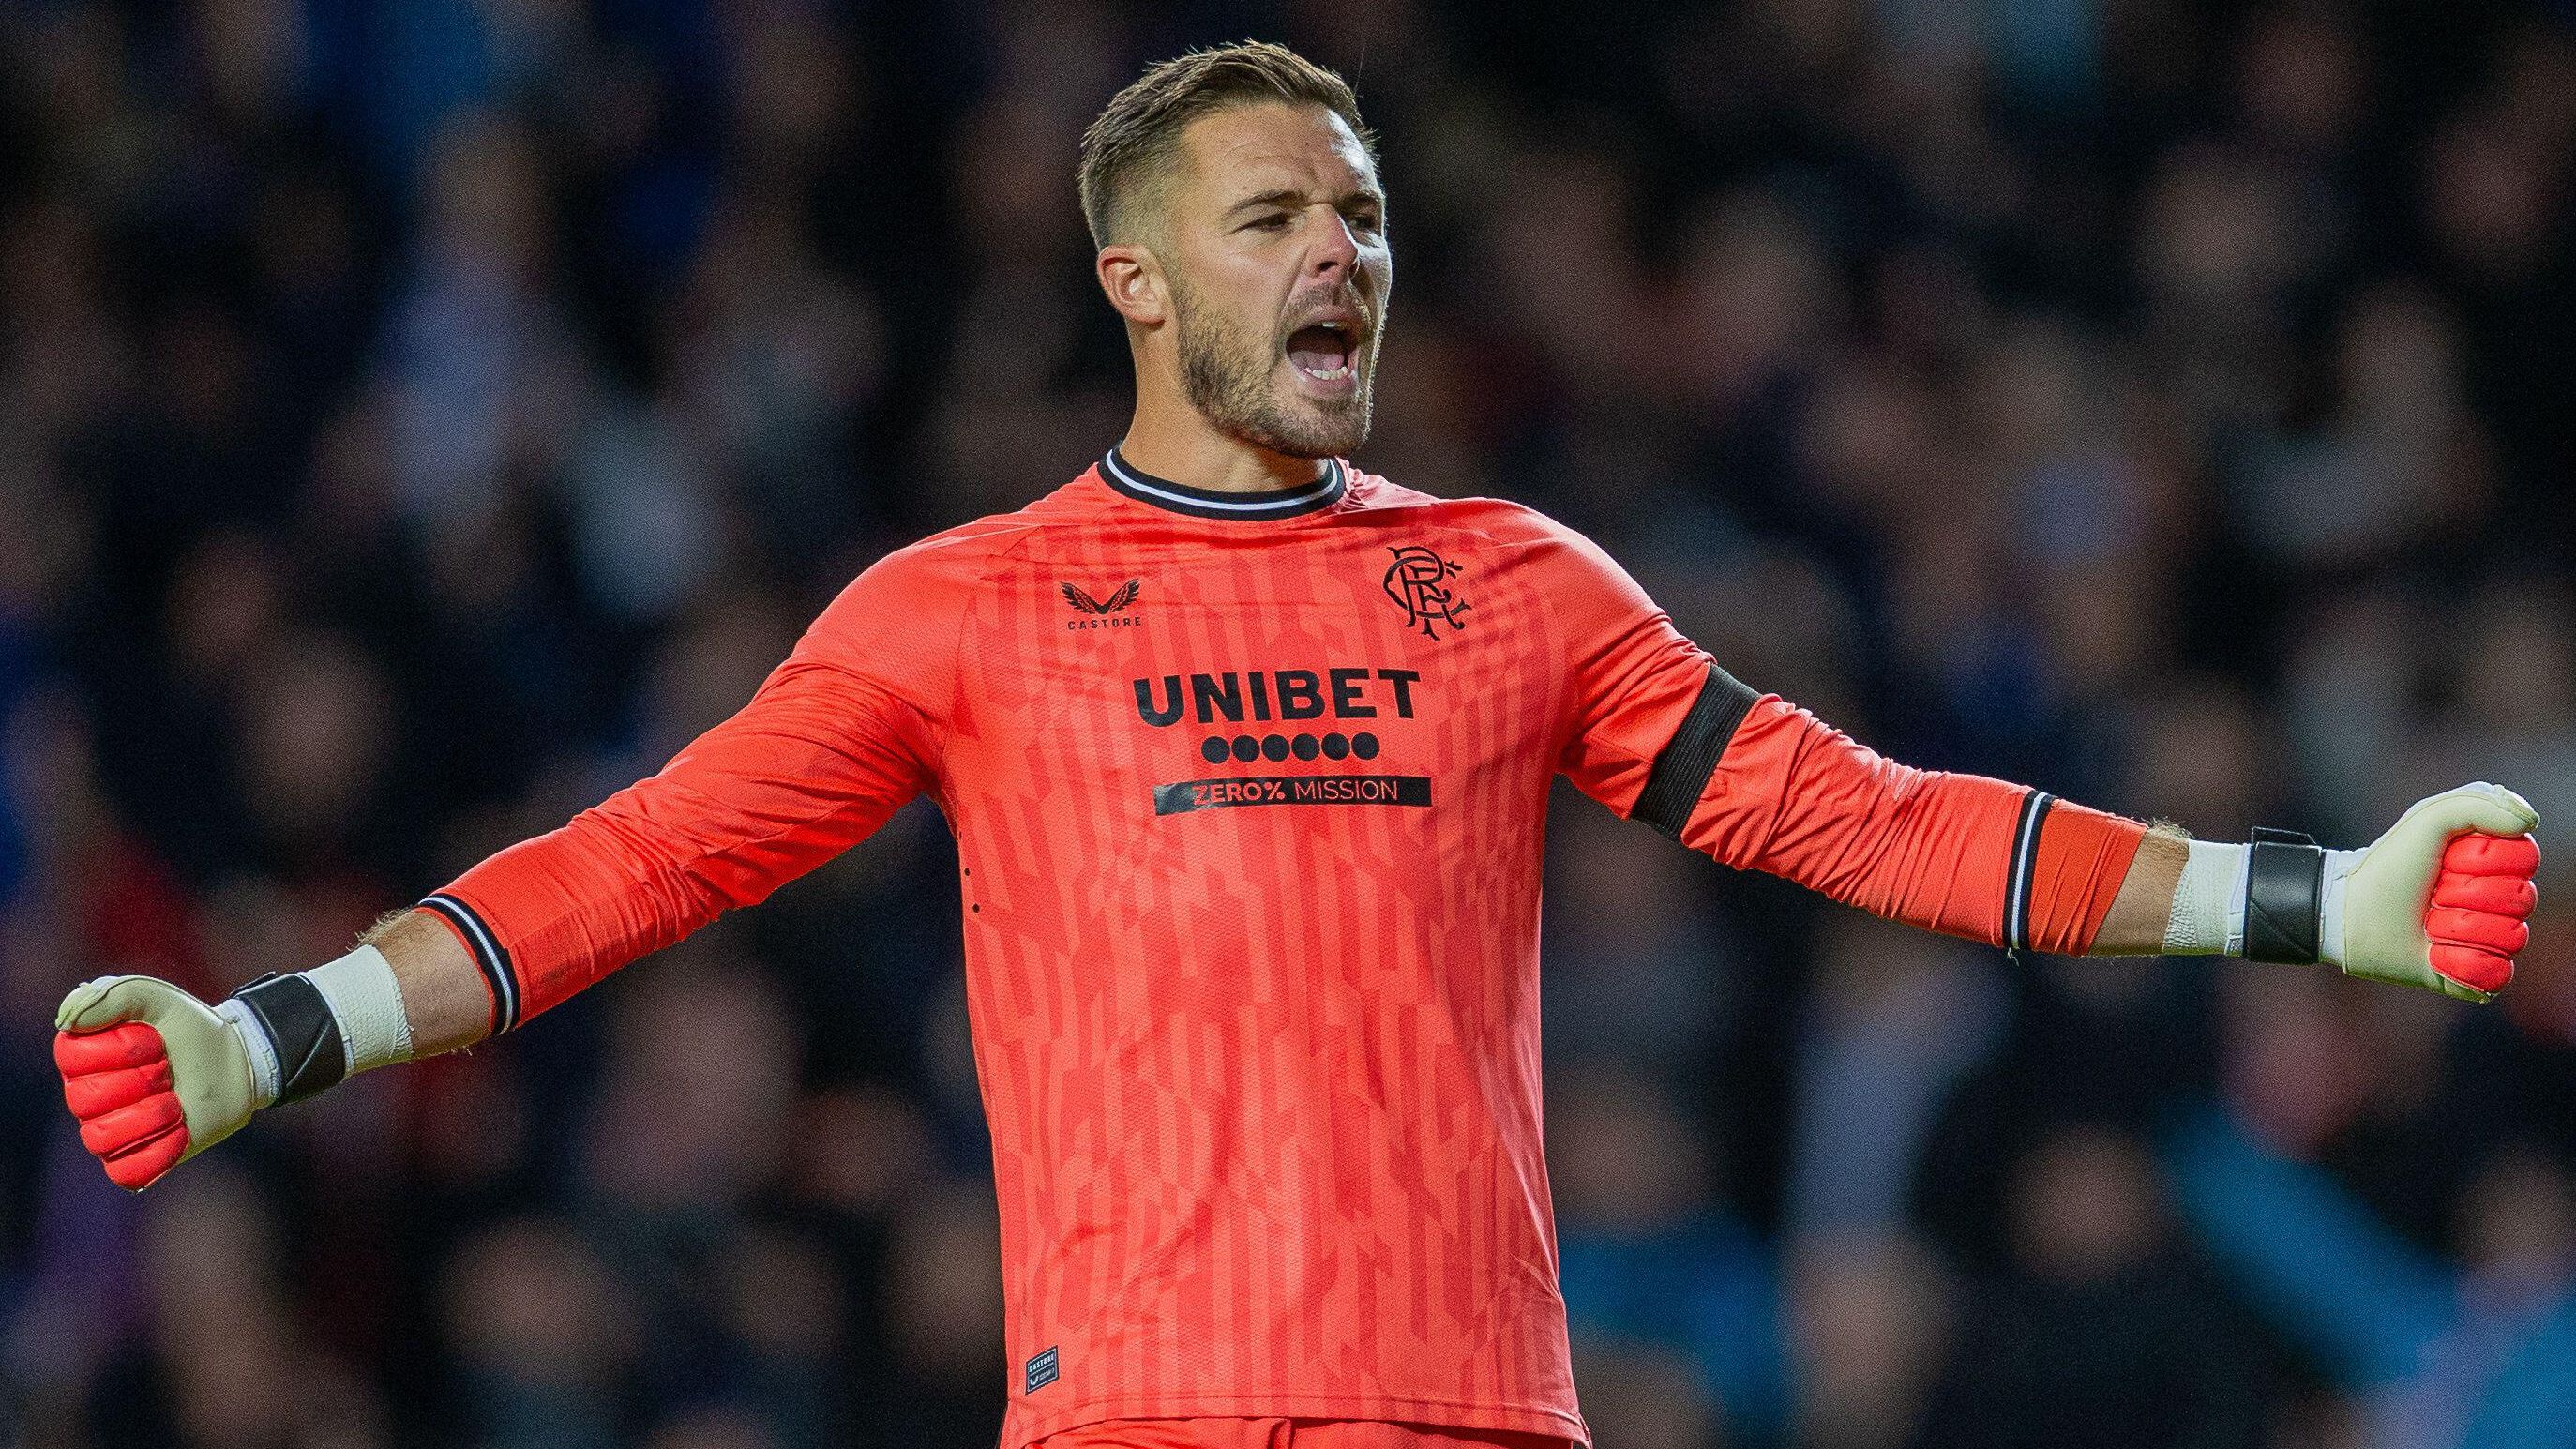 Michael Beale full of praise for Jack Butland after Real Betis win